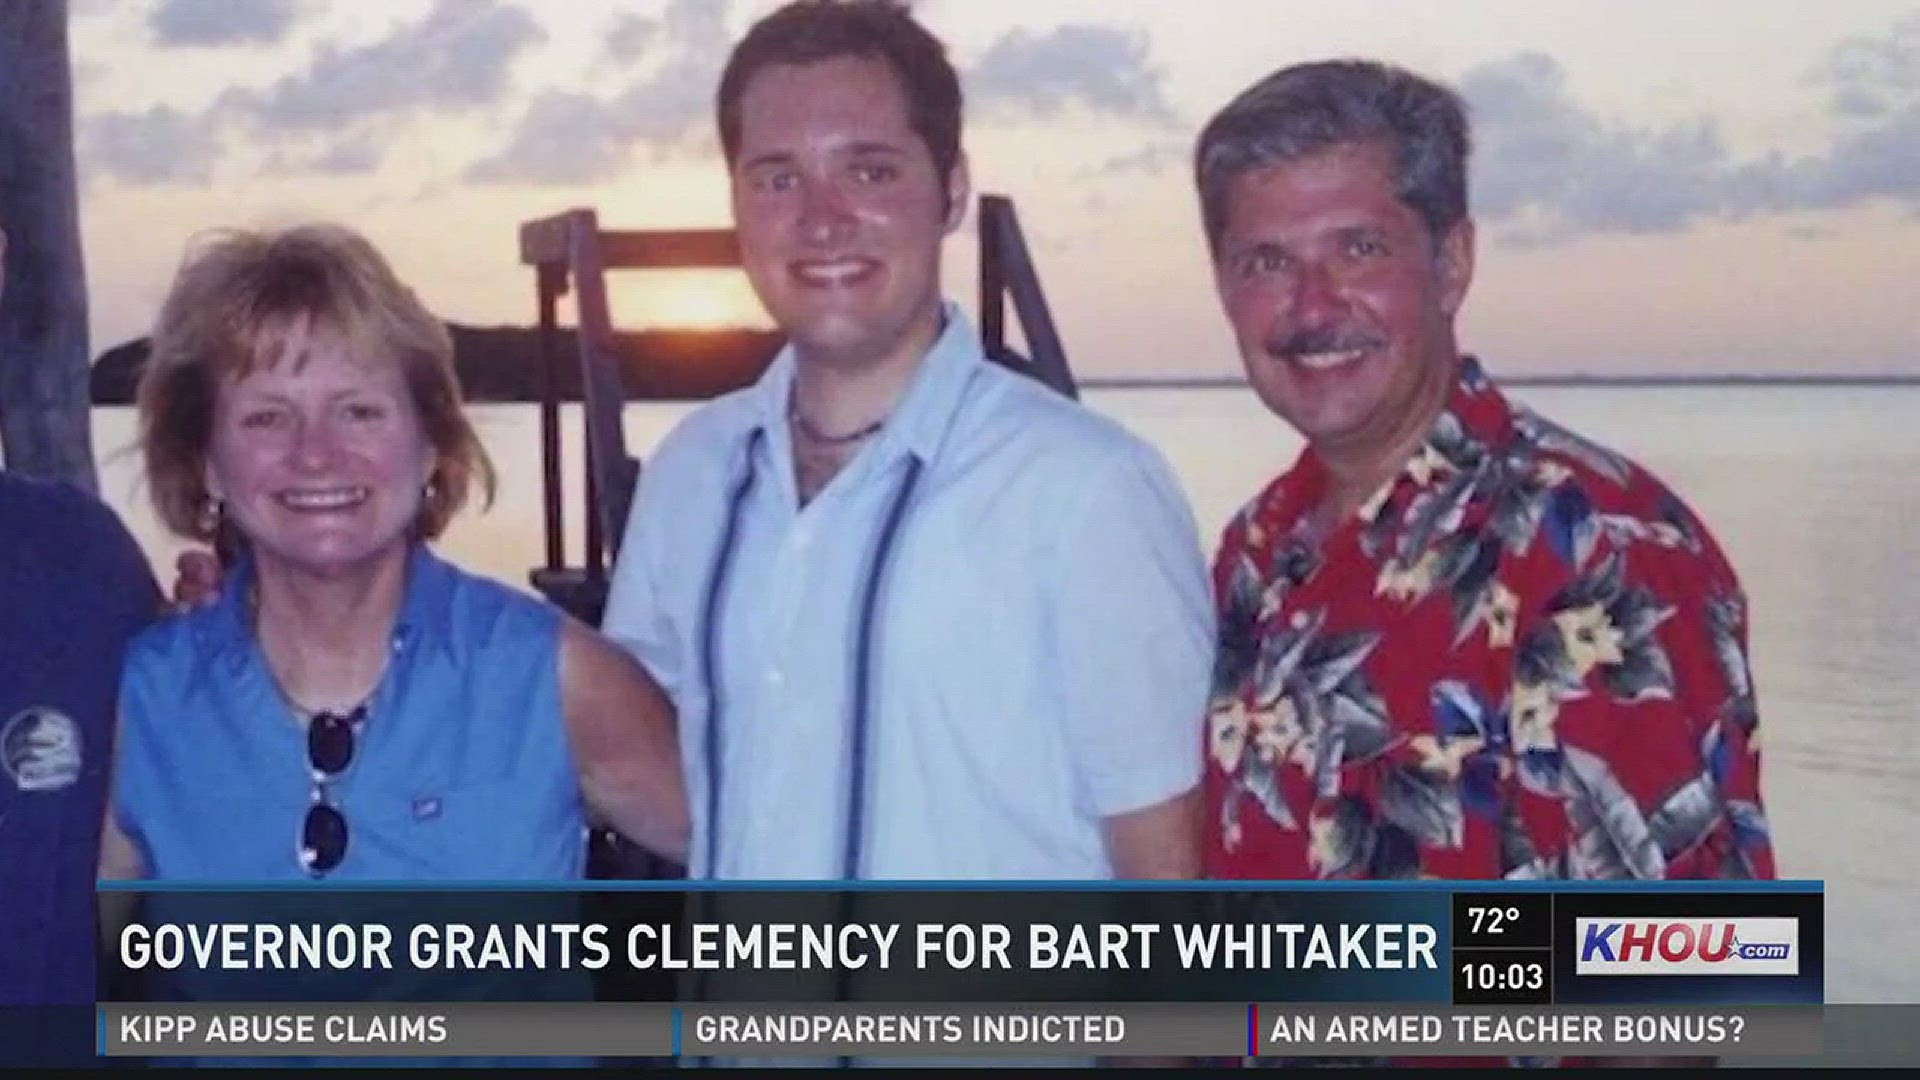 Kent Whitaker, father of convicted killer Bart Whitaker, spoke to the media Thursday evening following a proclamation from Governor Greg Abbott commuting Bart's death sentence for his role in the deaths of his mother and younger brother.